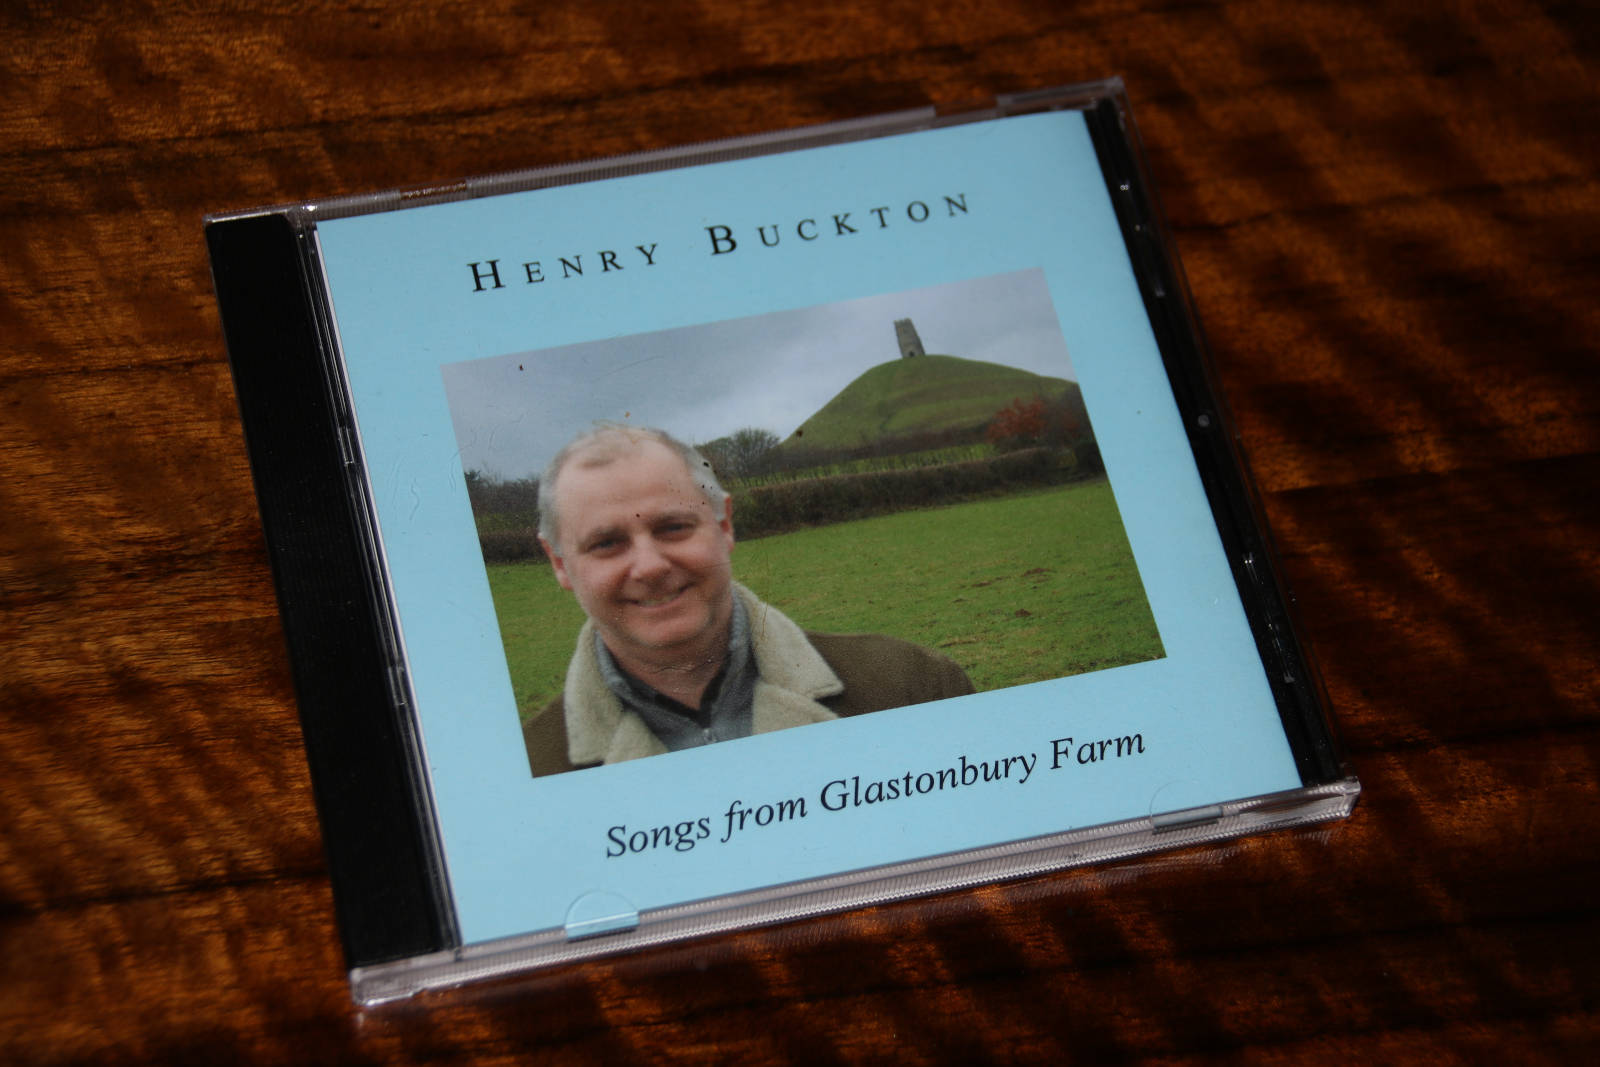 Image of henry buckton songs from glastonbury farm <h2>2019-09-30 - Farkfest, the Family Field.  The story can now be told.</h2>